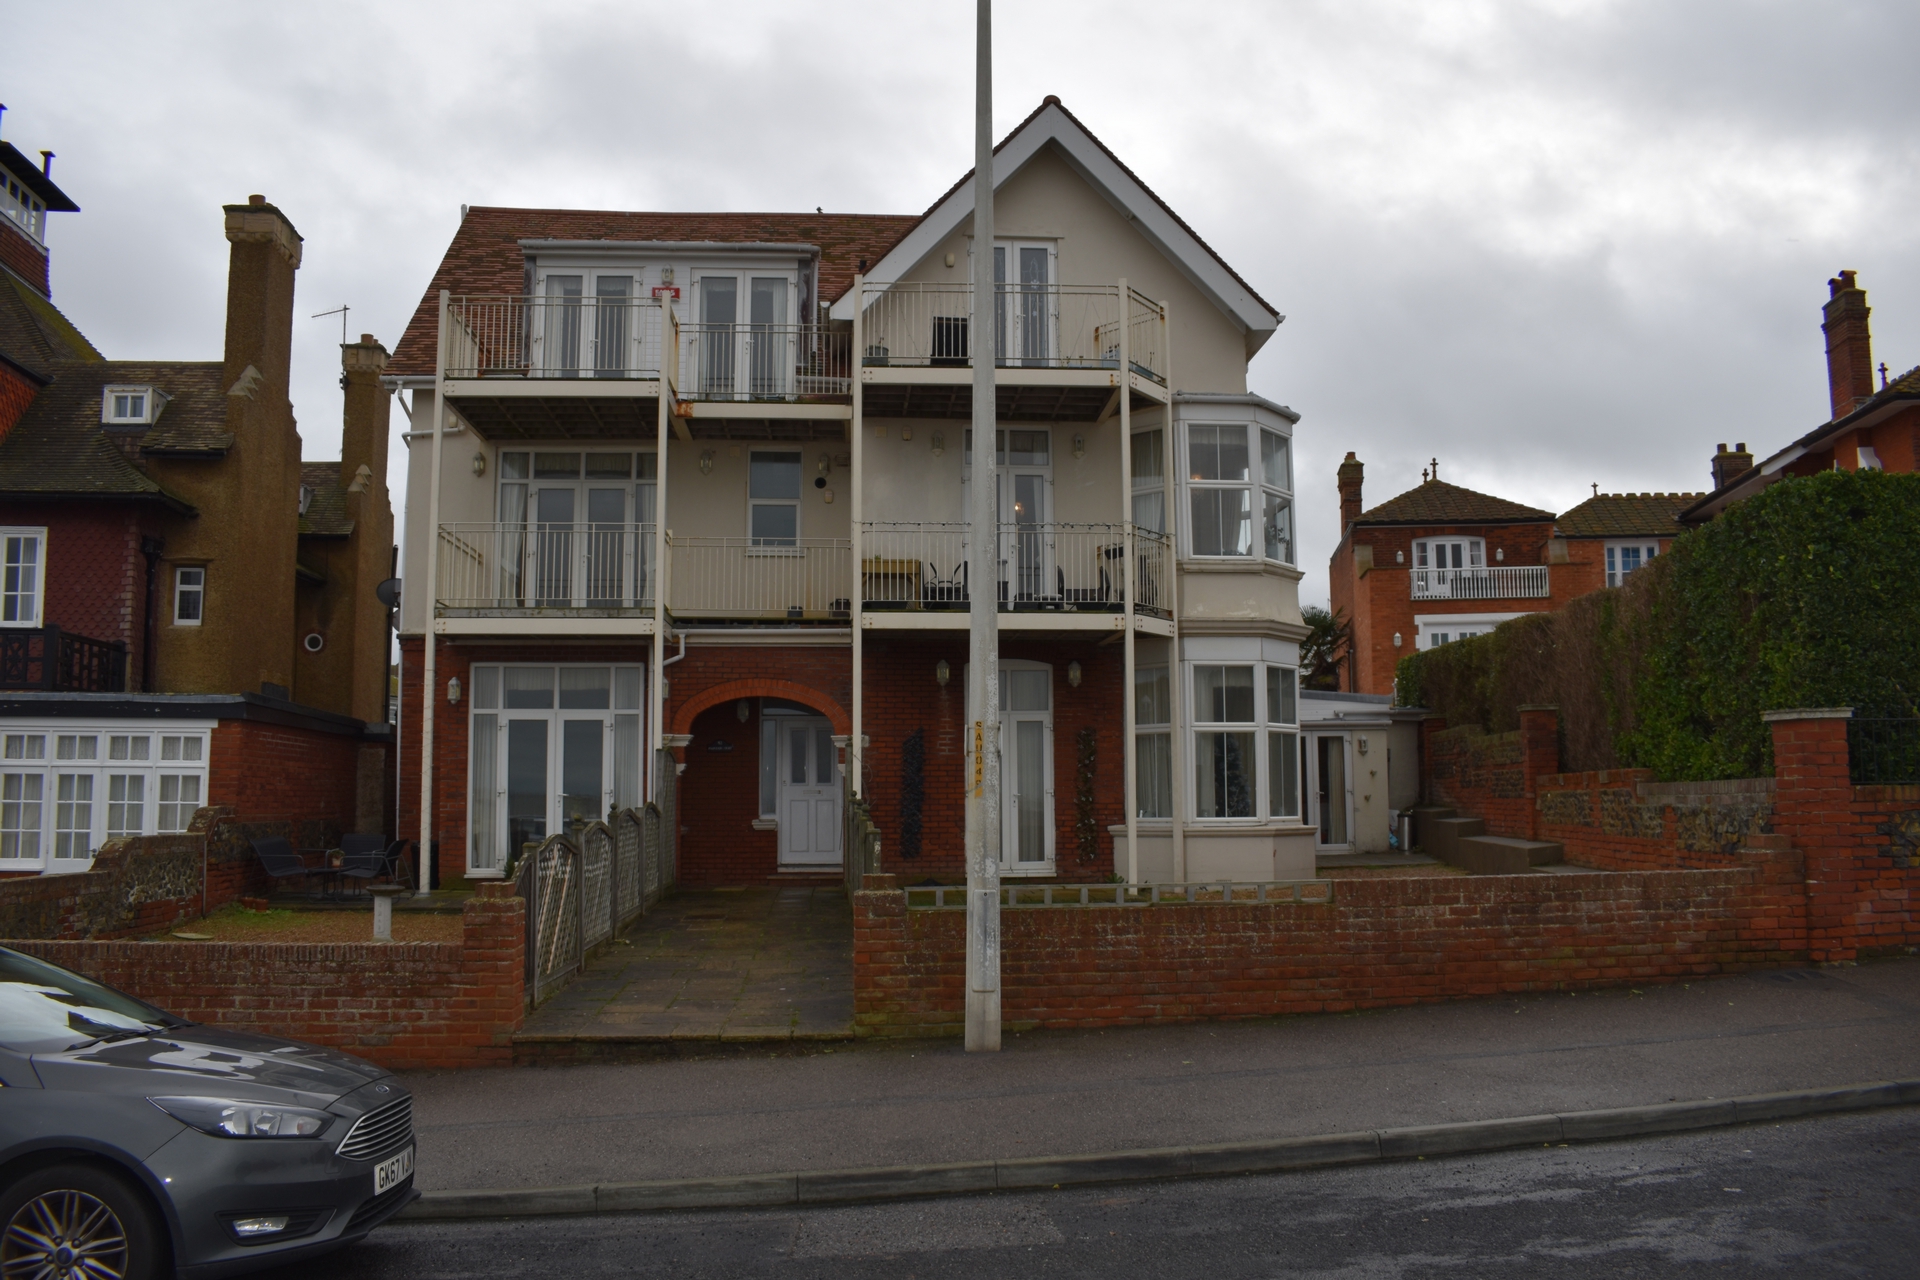 2 bed flat to rent in Sea Road, Westgate, CT8 